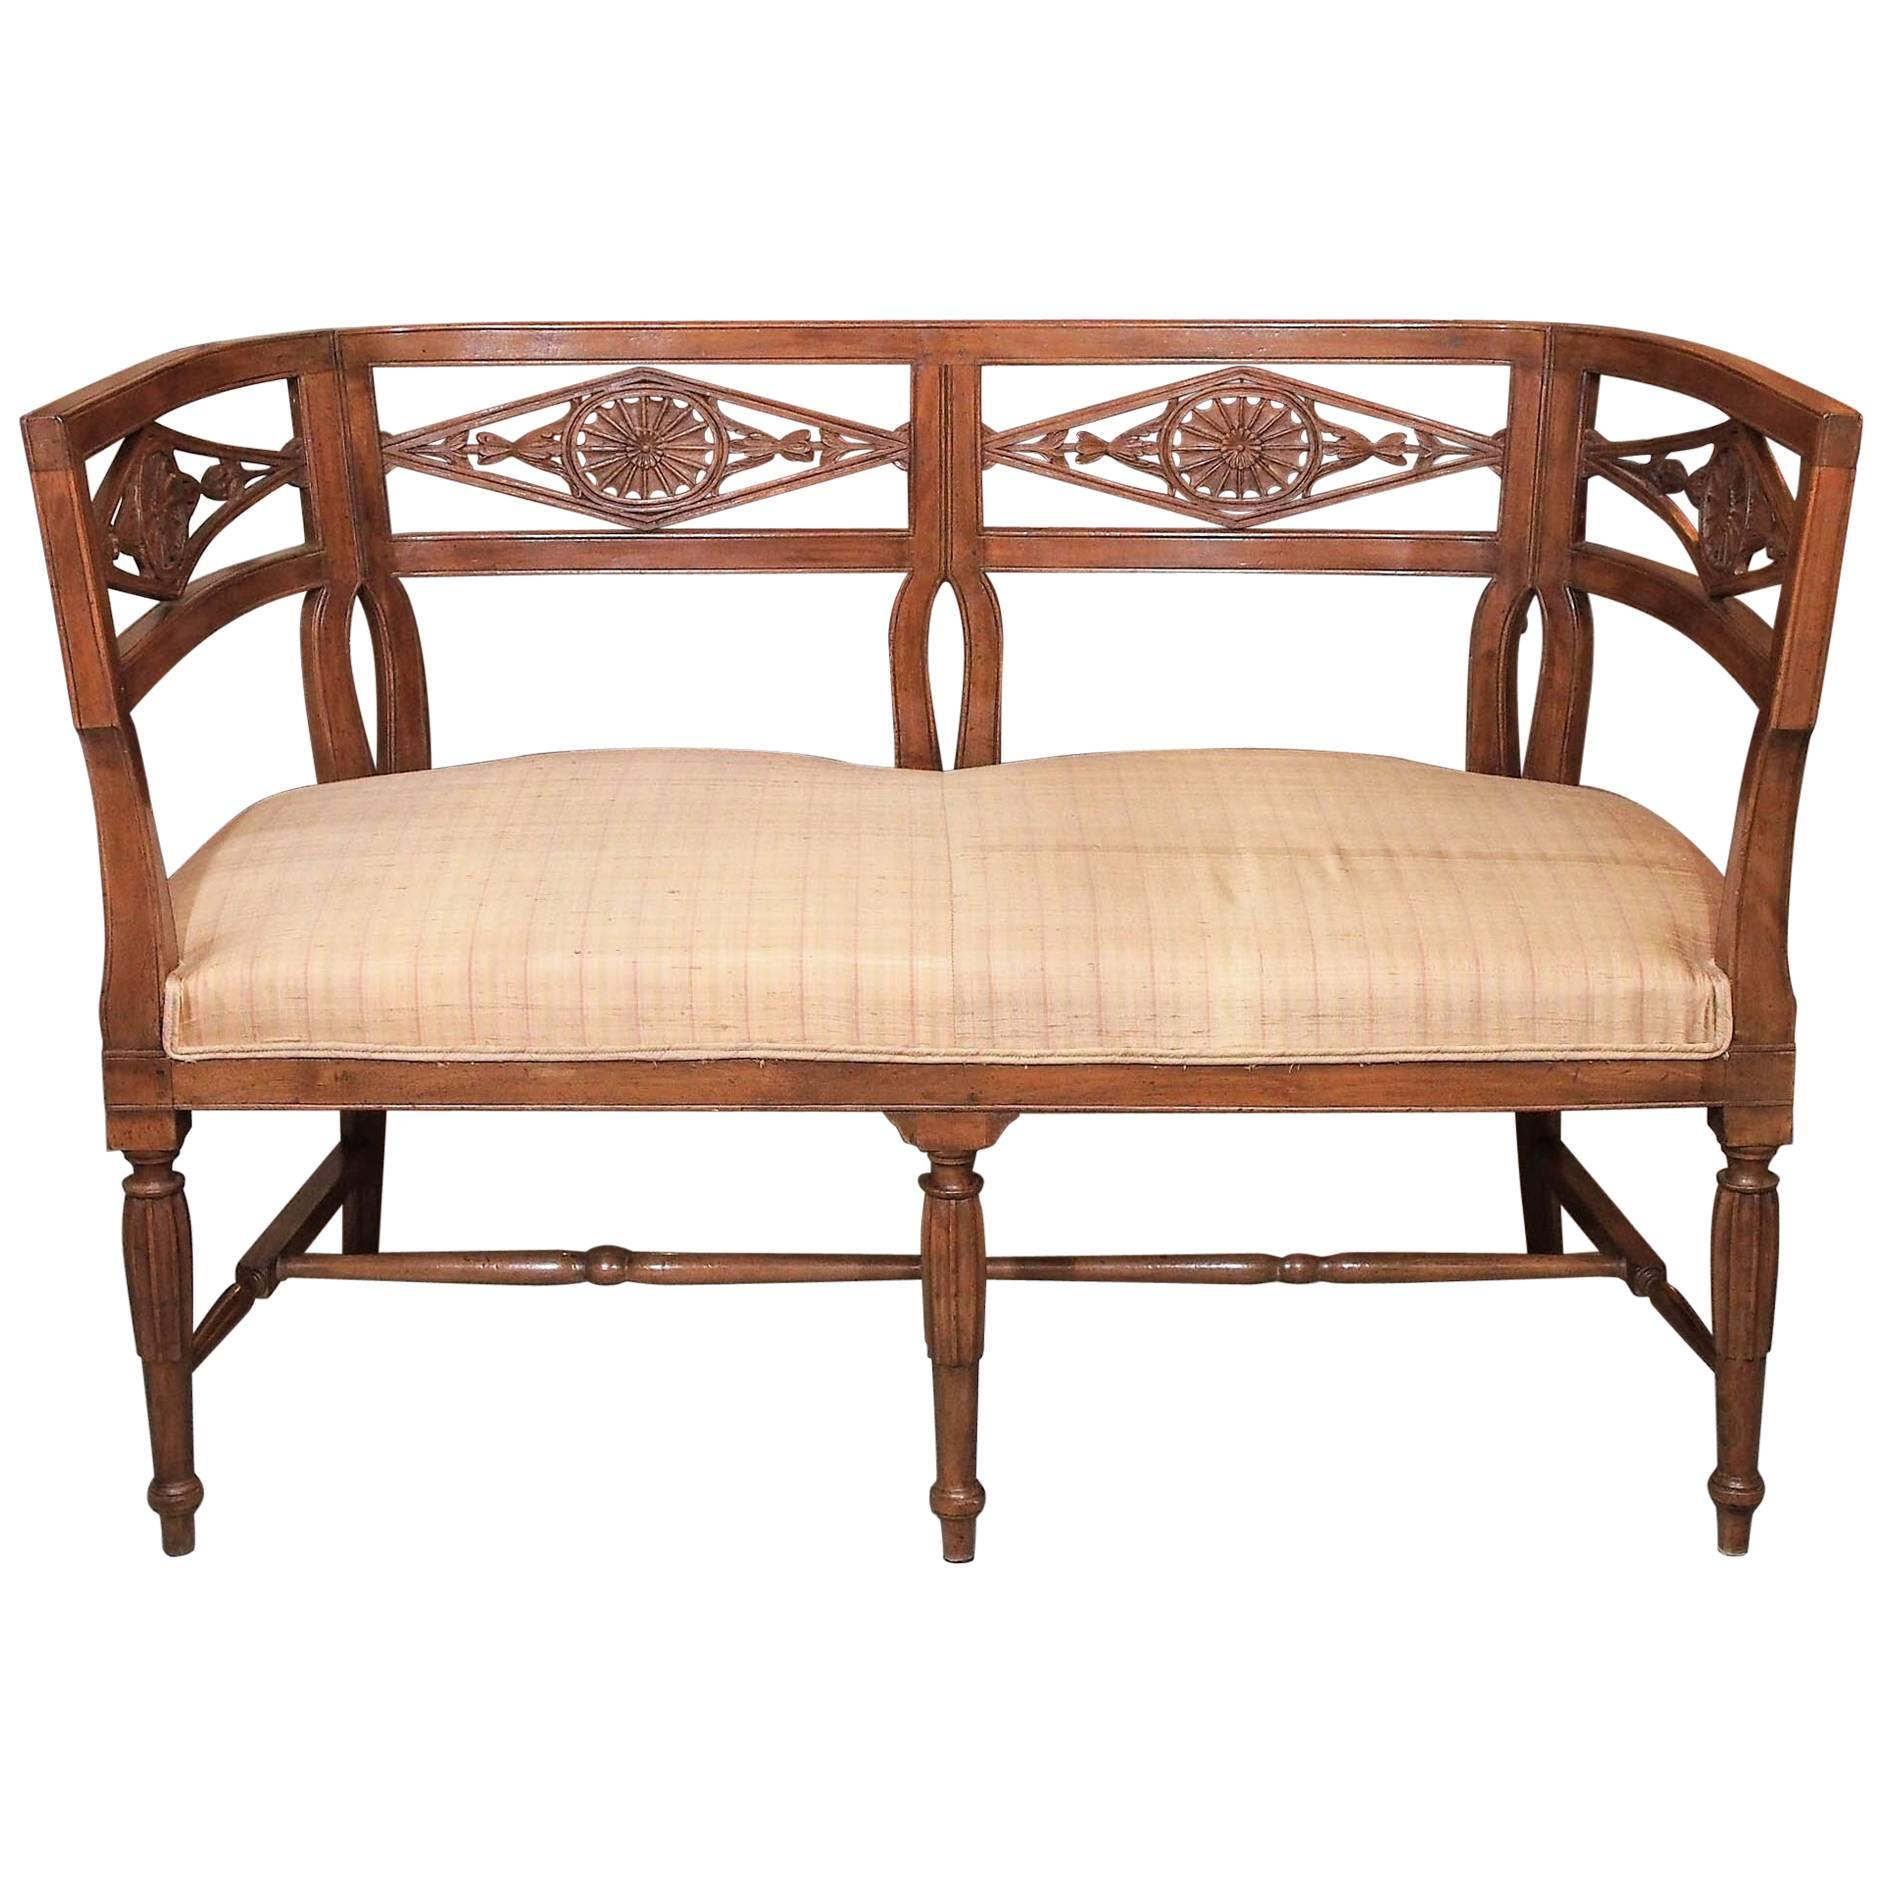 Antique French Fruitwood Settee, Directoire Style